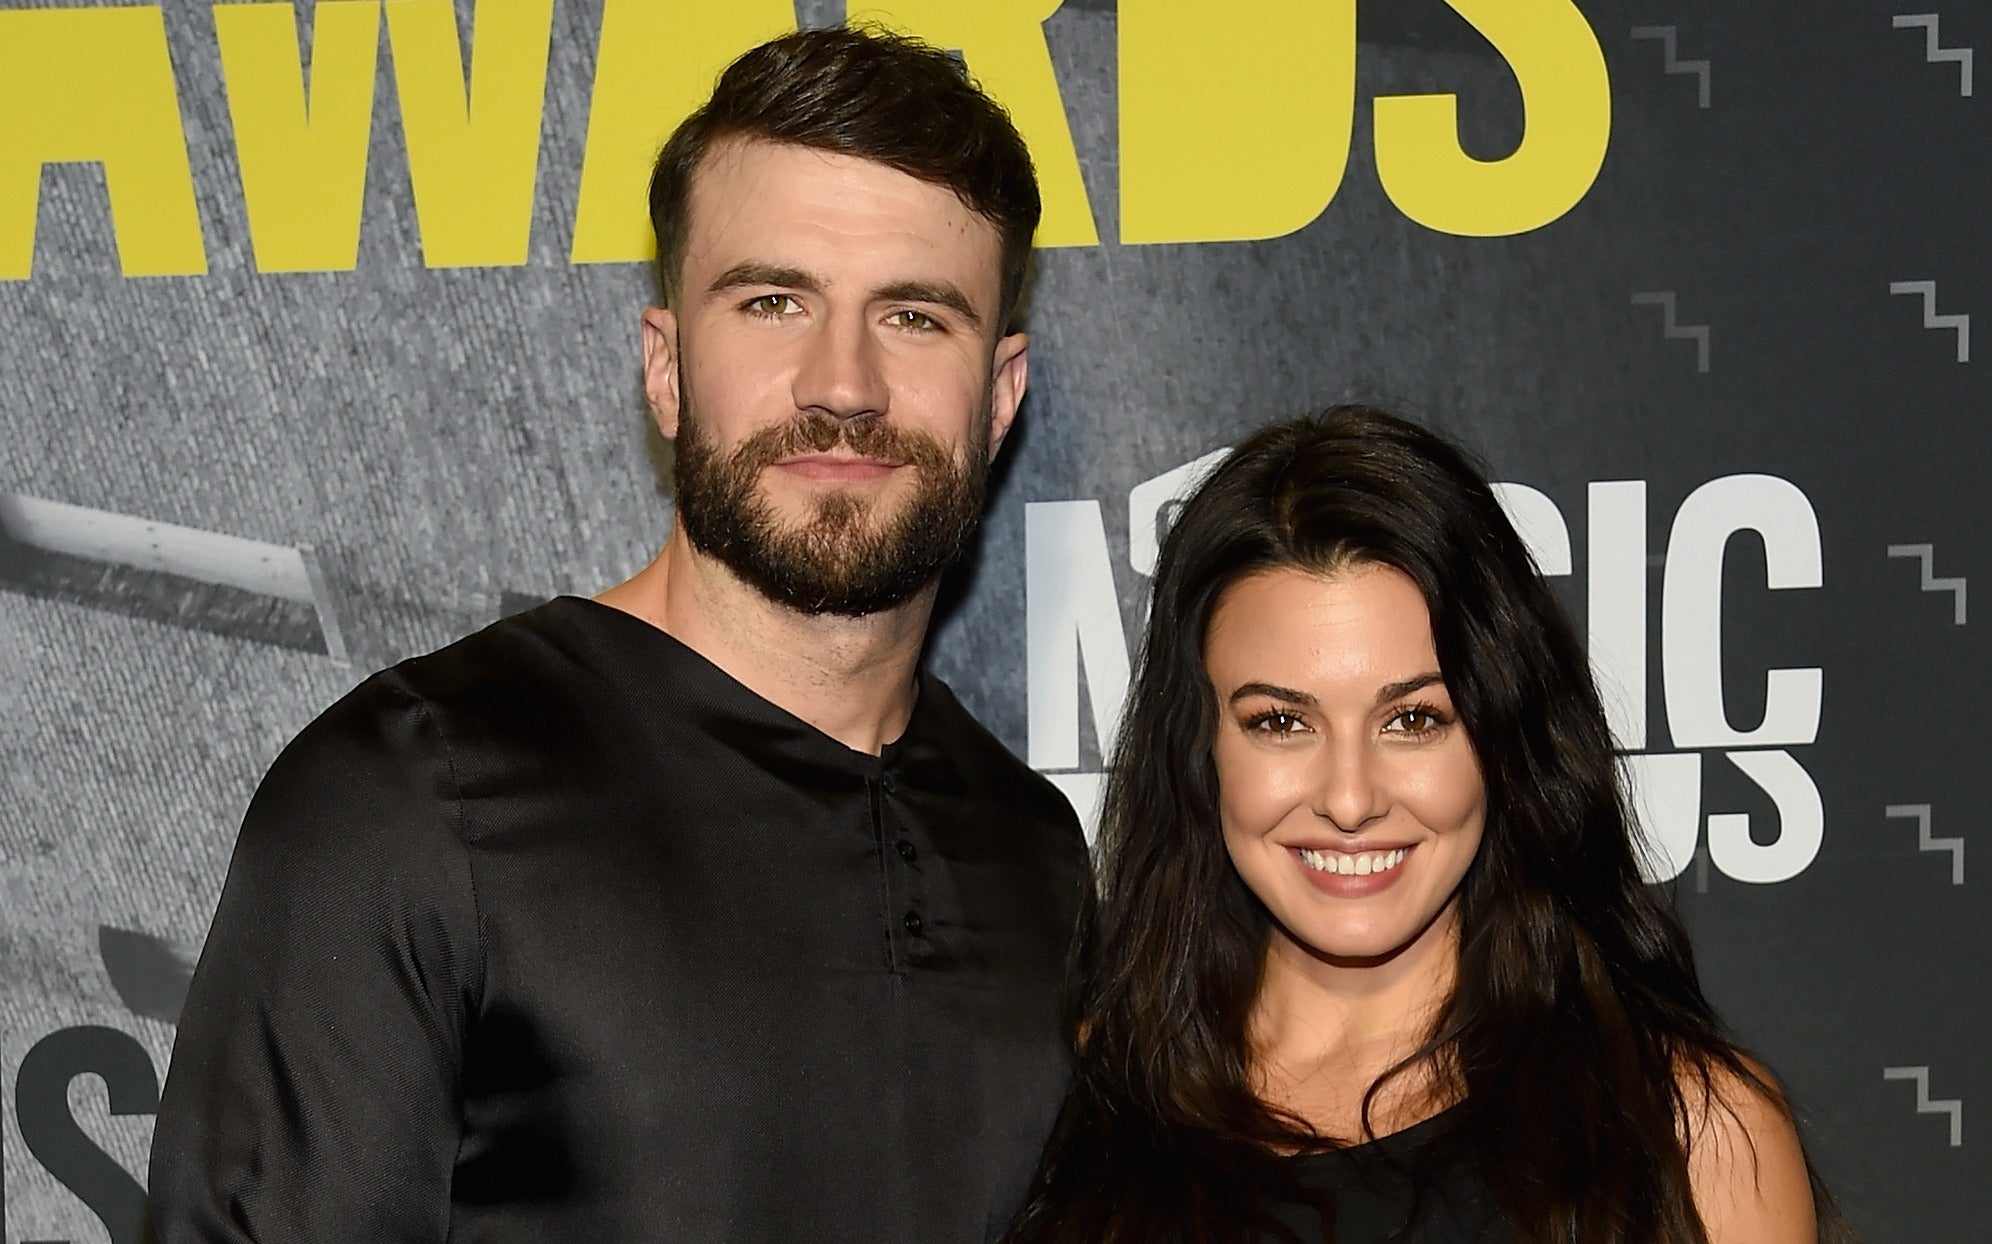 Sam Hunt and Hannah Lee Fowler got married in 2017